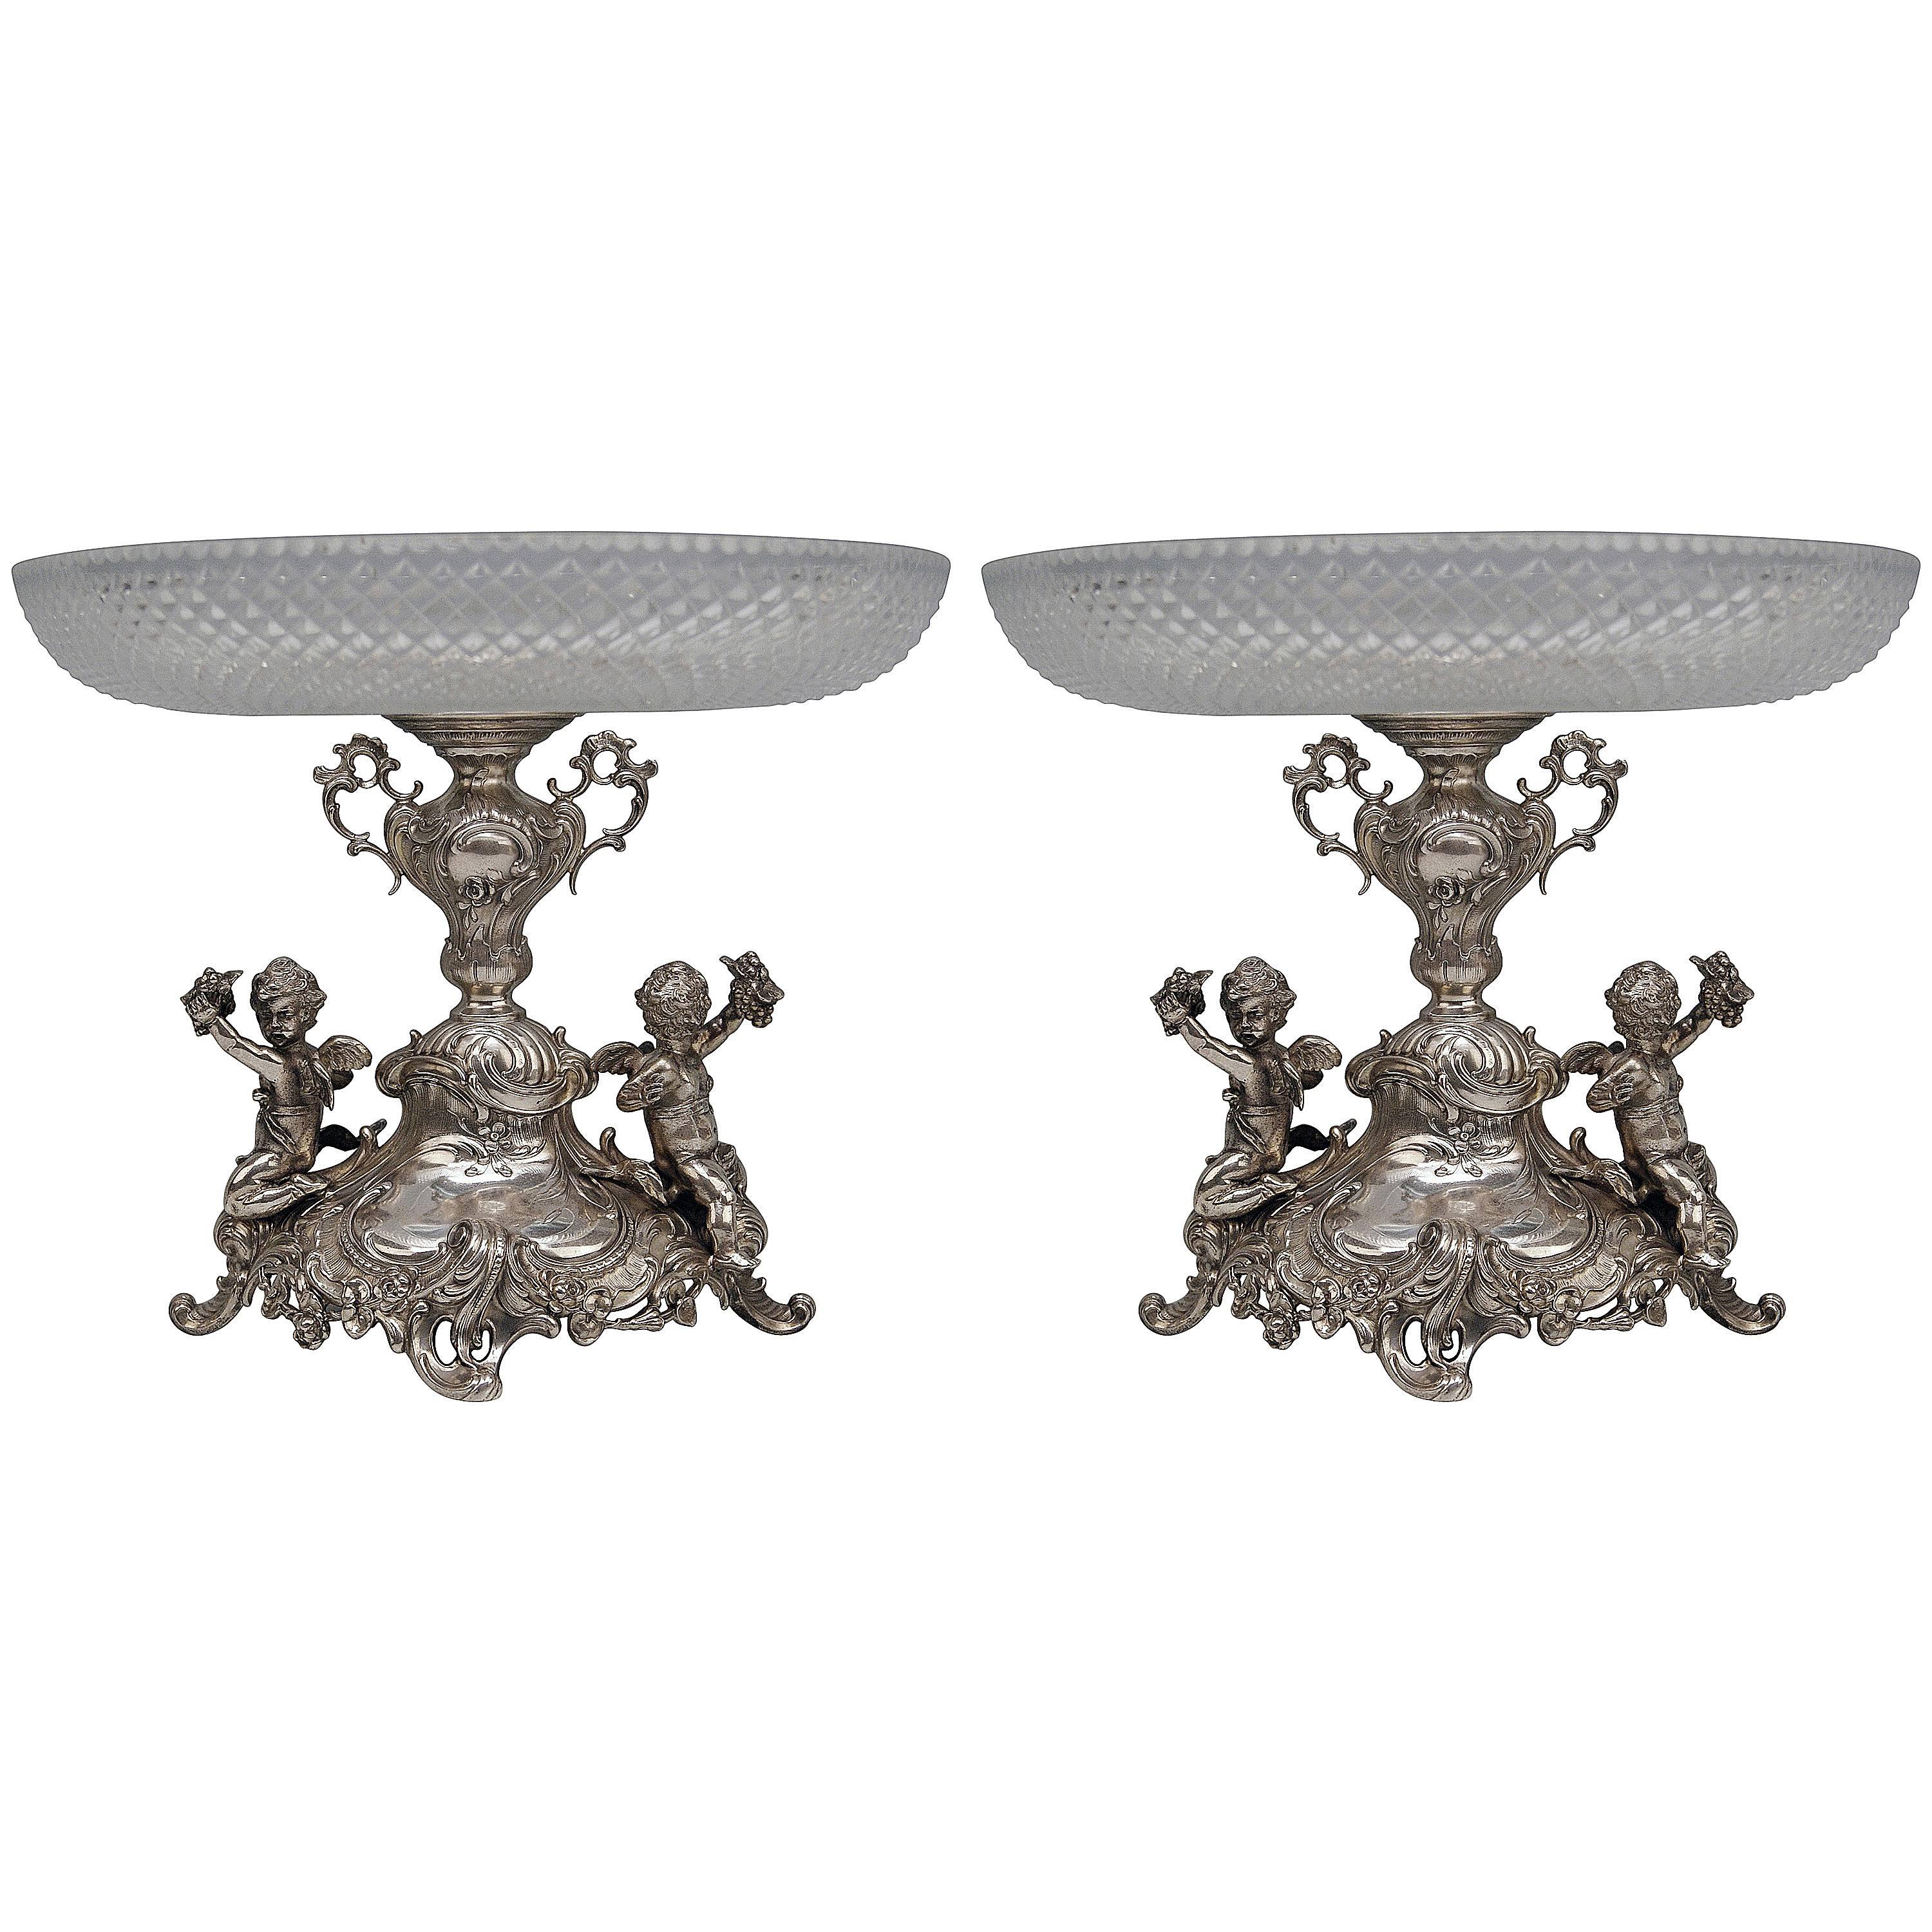 Silver Historicism Pair of Centrepieces by Bruckmann and Sons, Germany